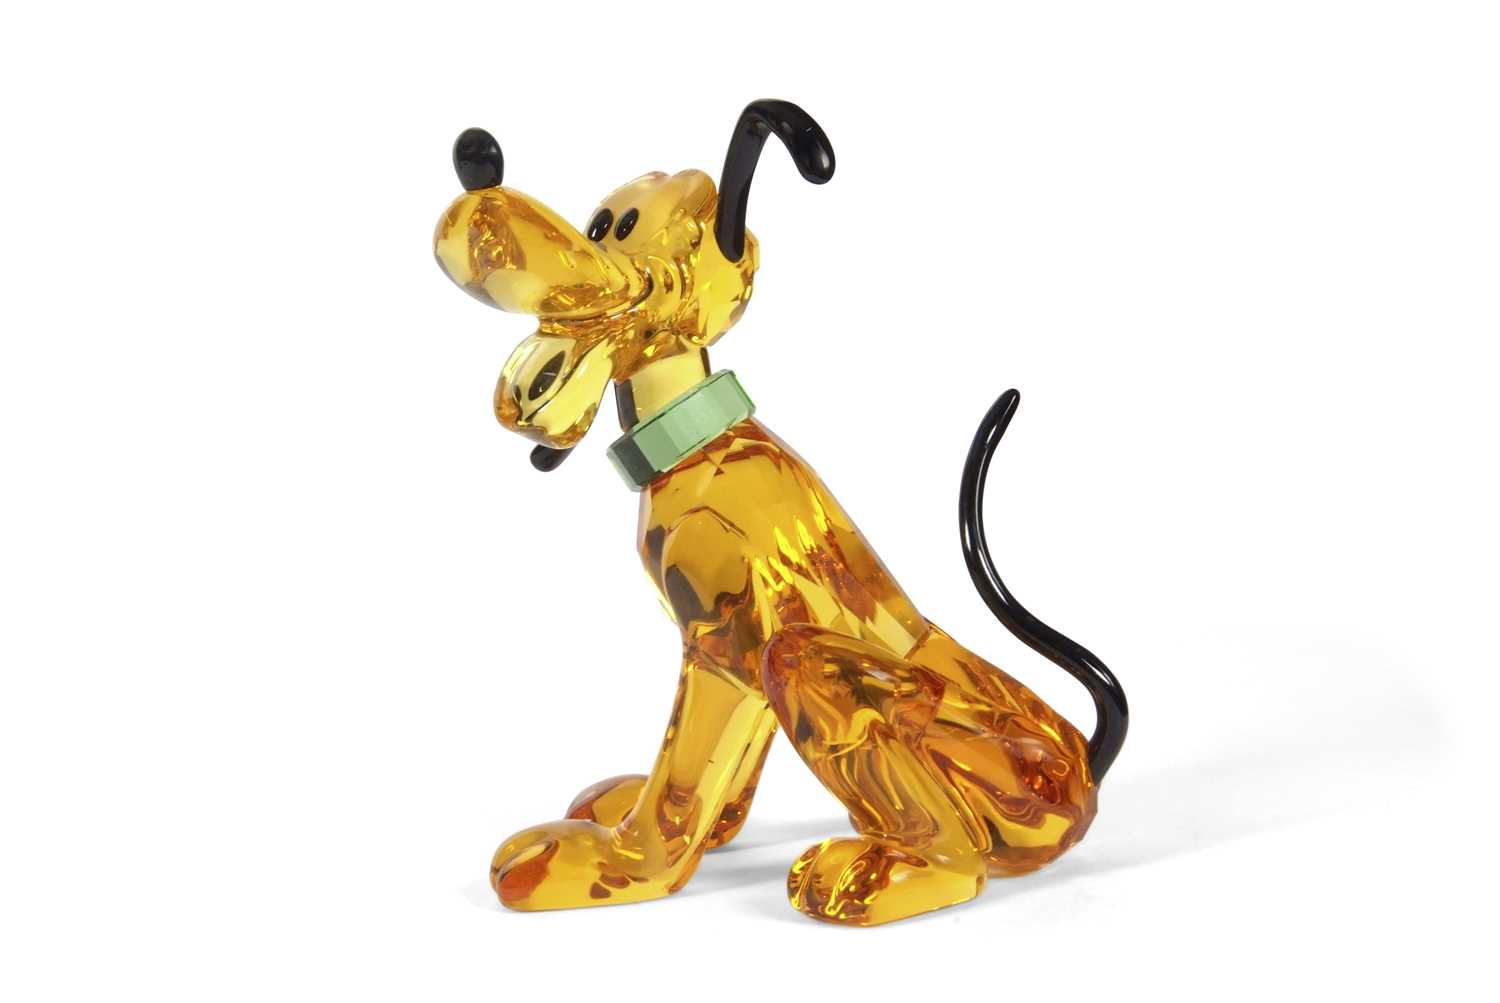 A Swarovski Disney figure of Pluto with yellow colour, black ears and tail, with original box, 9cm